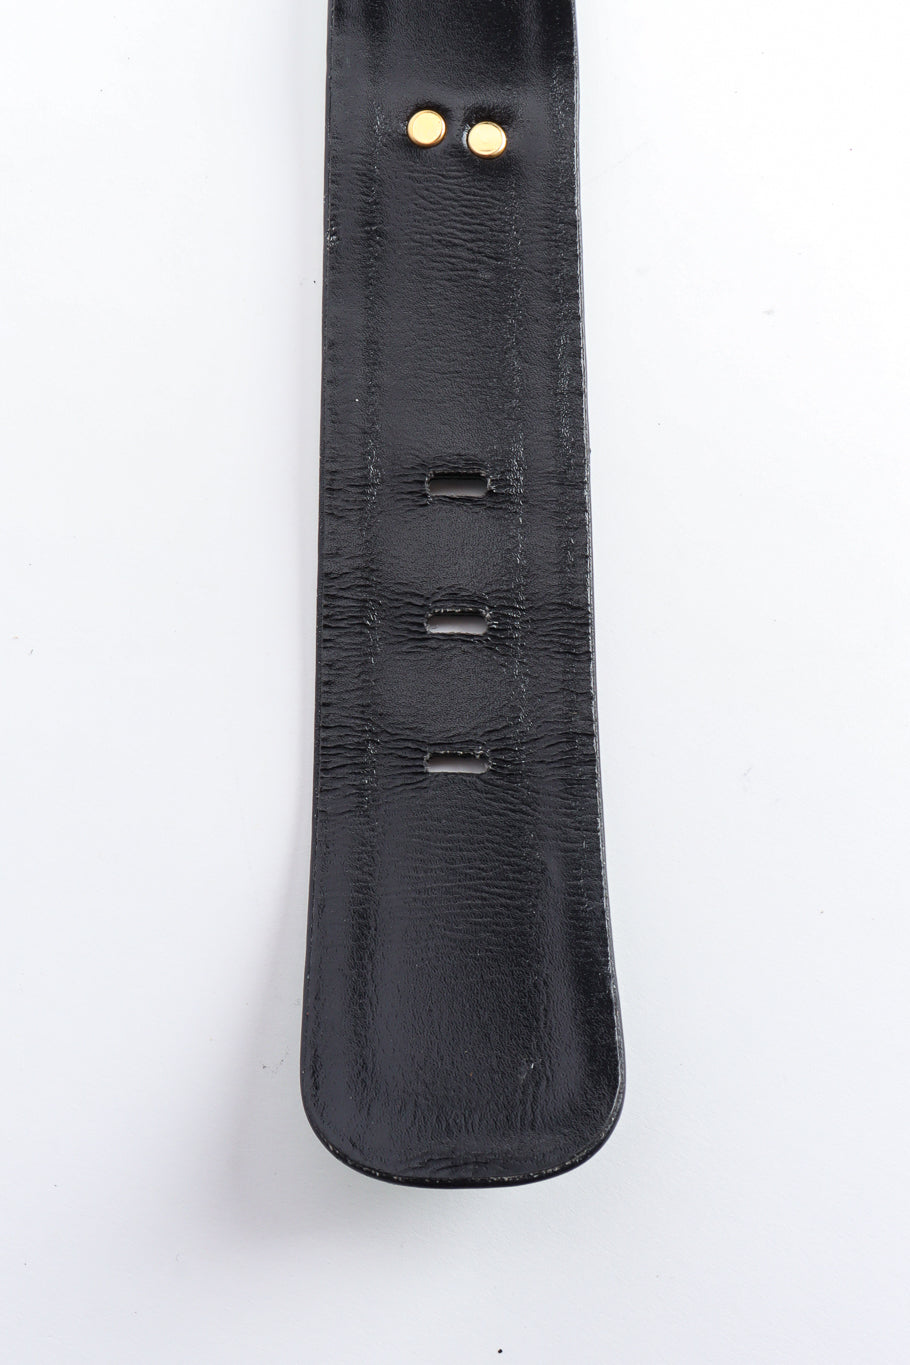 panther studded leather belt by Escada inside prong holes @recessla